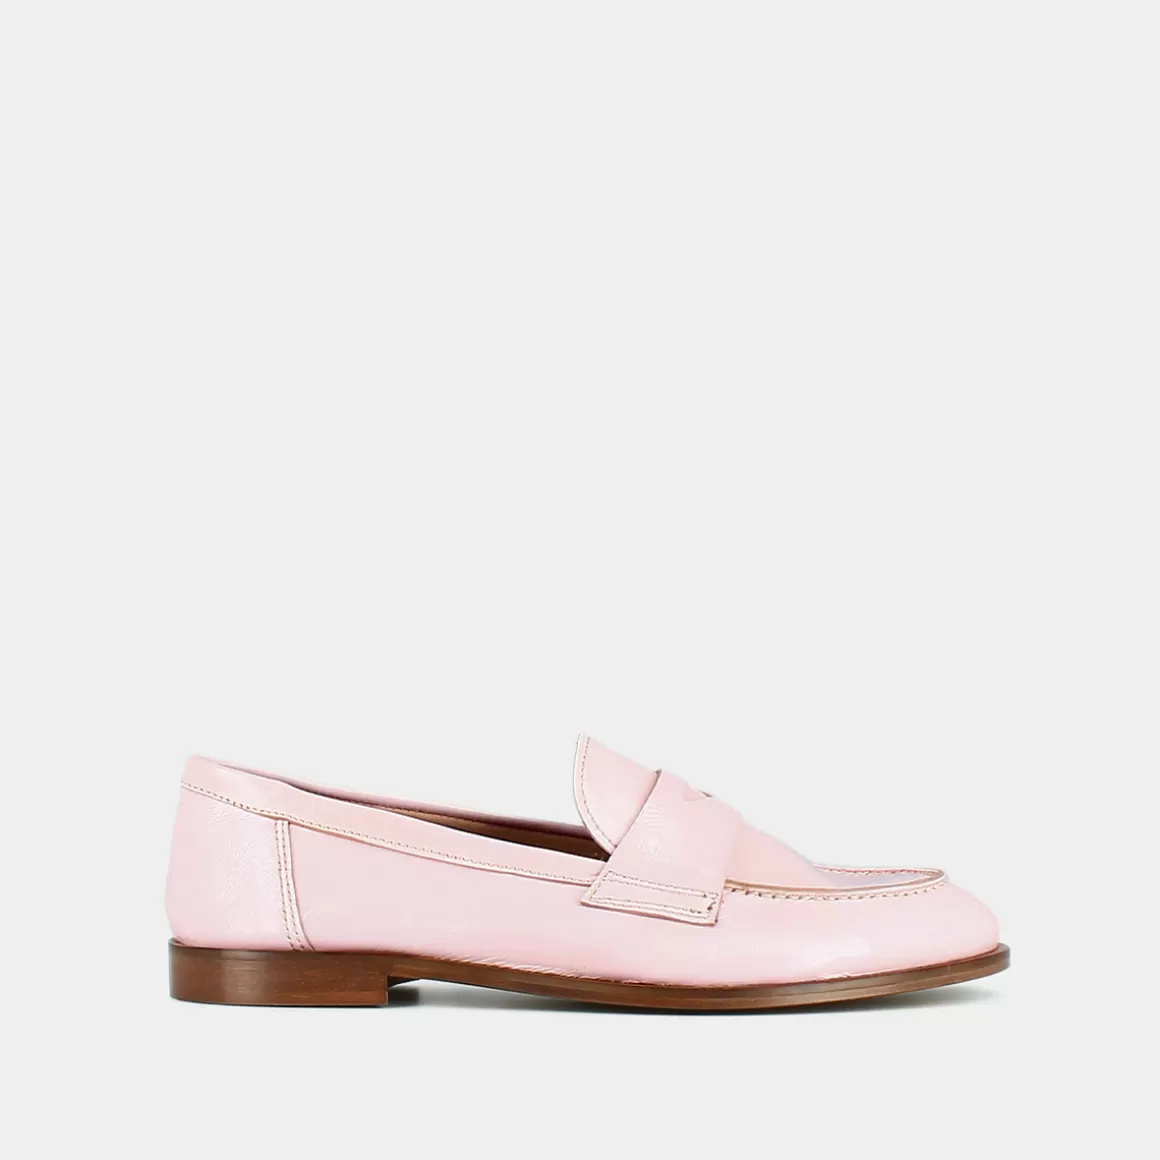 Closed toe and round loafers<Jonak Flash Sale